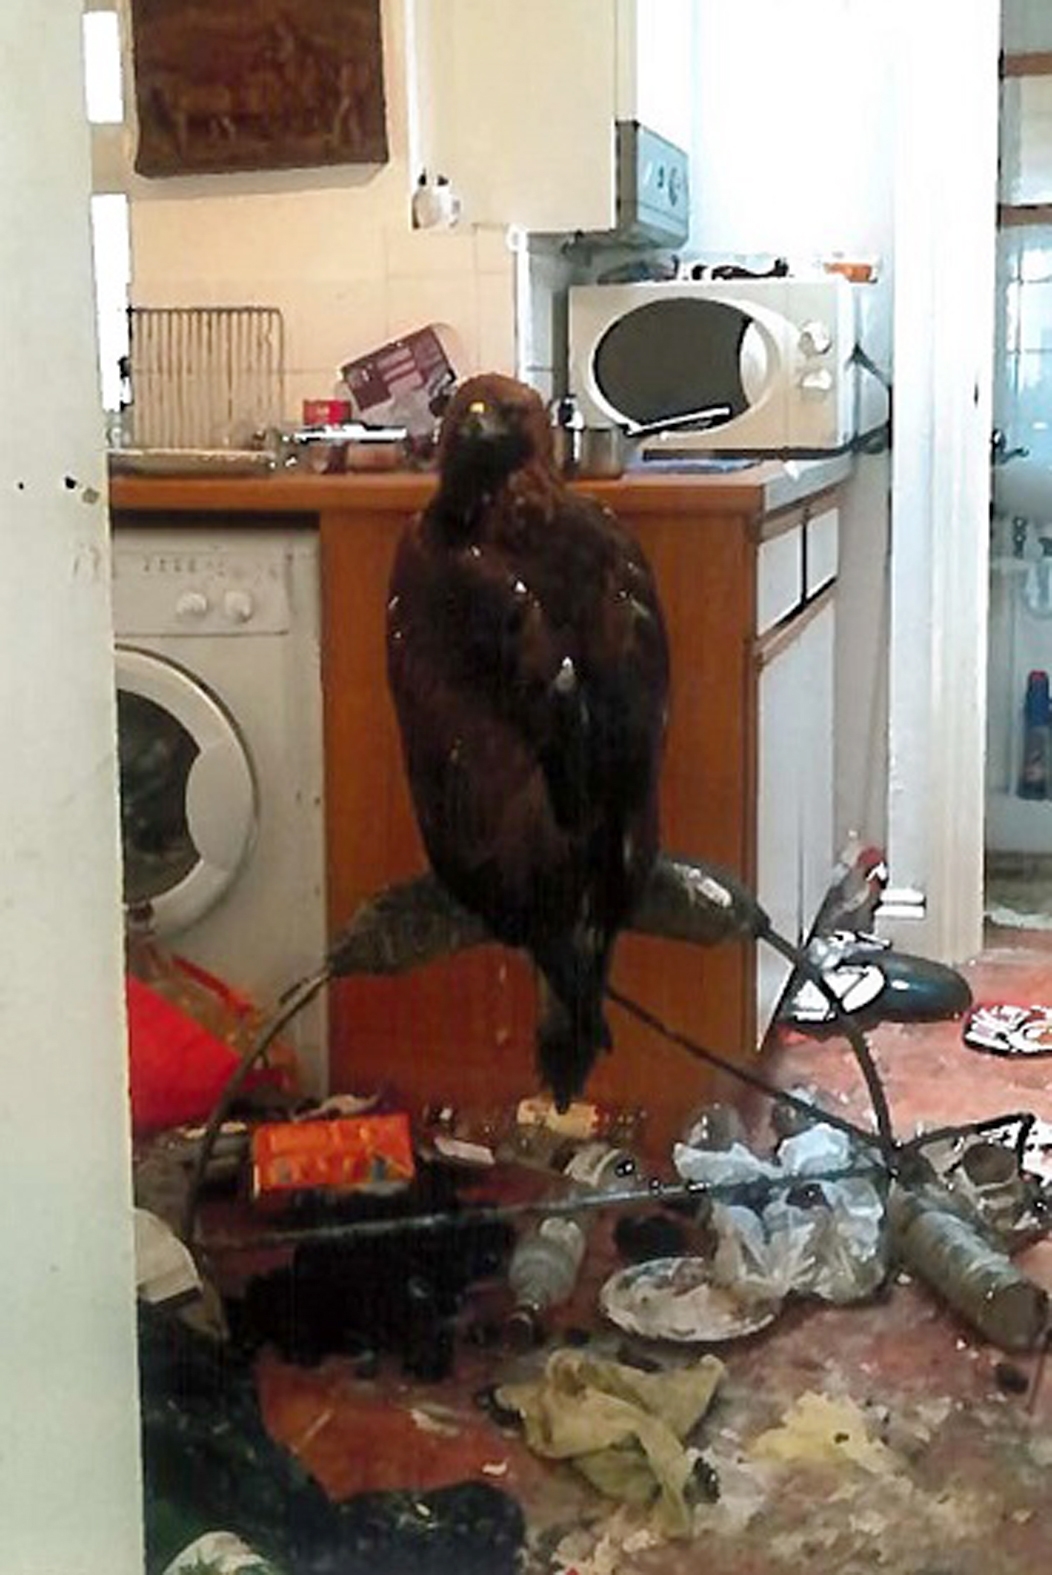 Golden eagle rescued from squalid kitchen